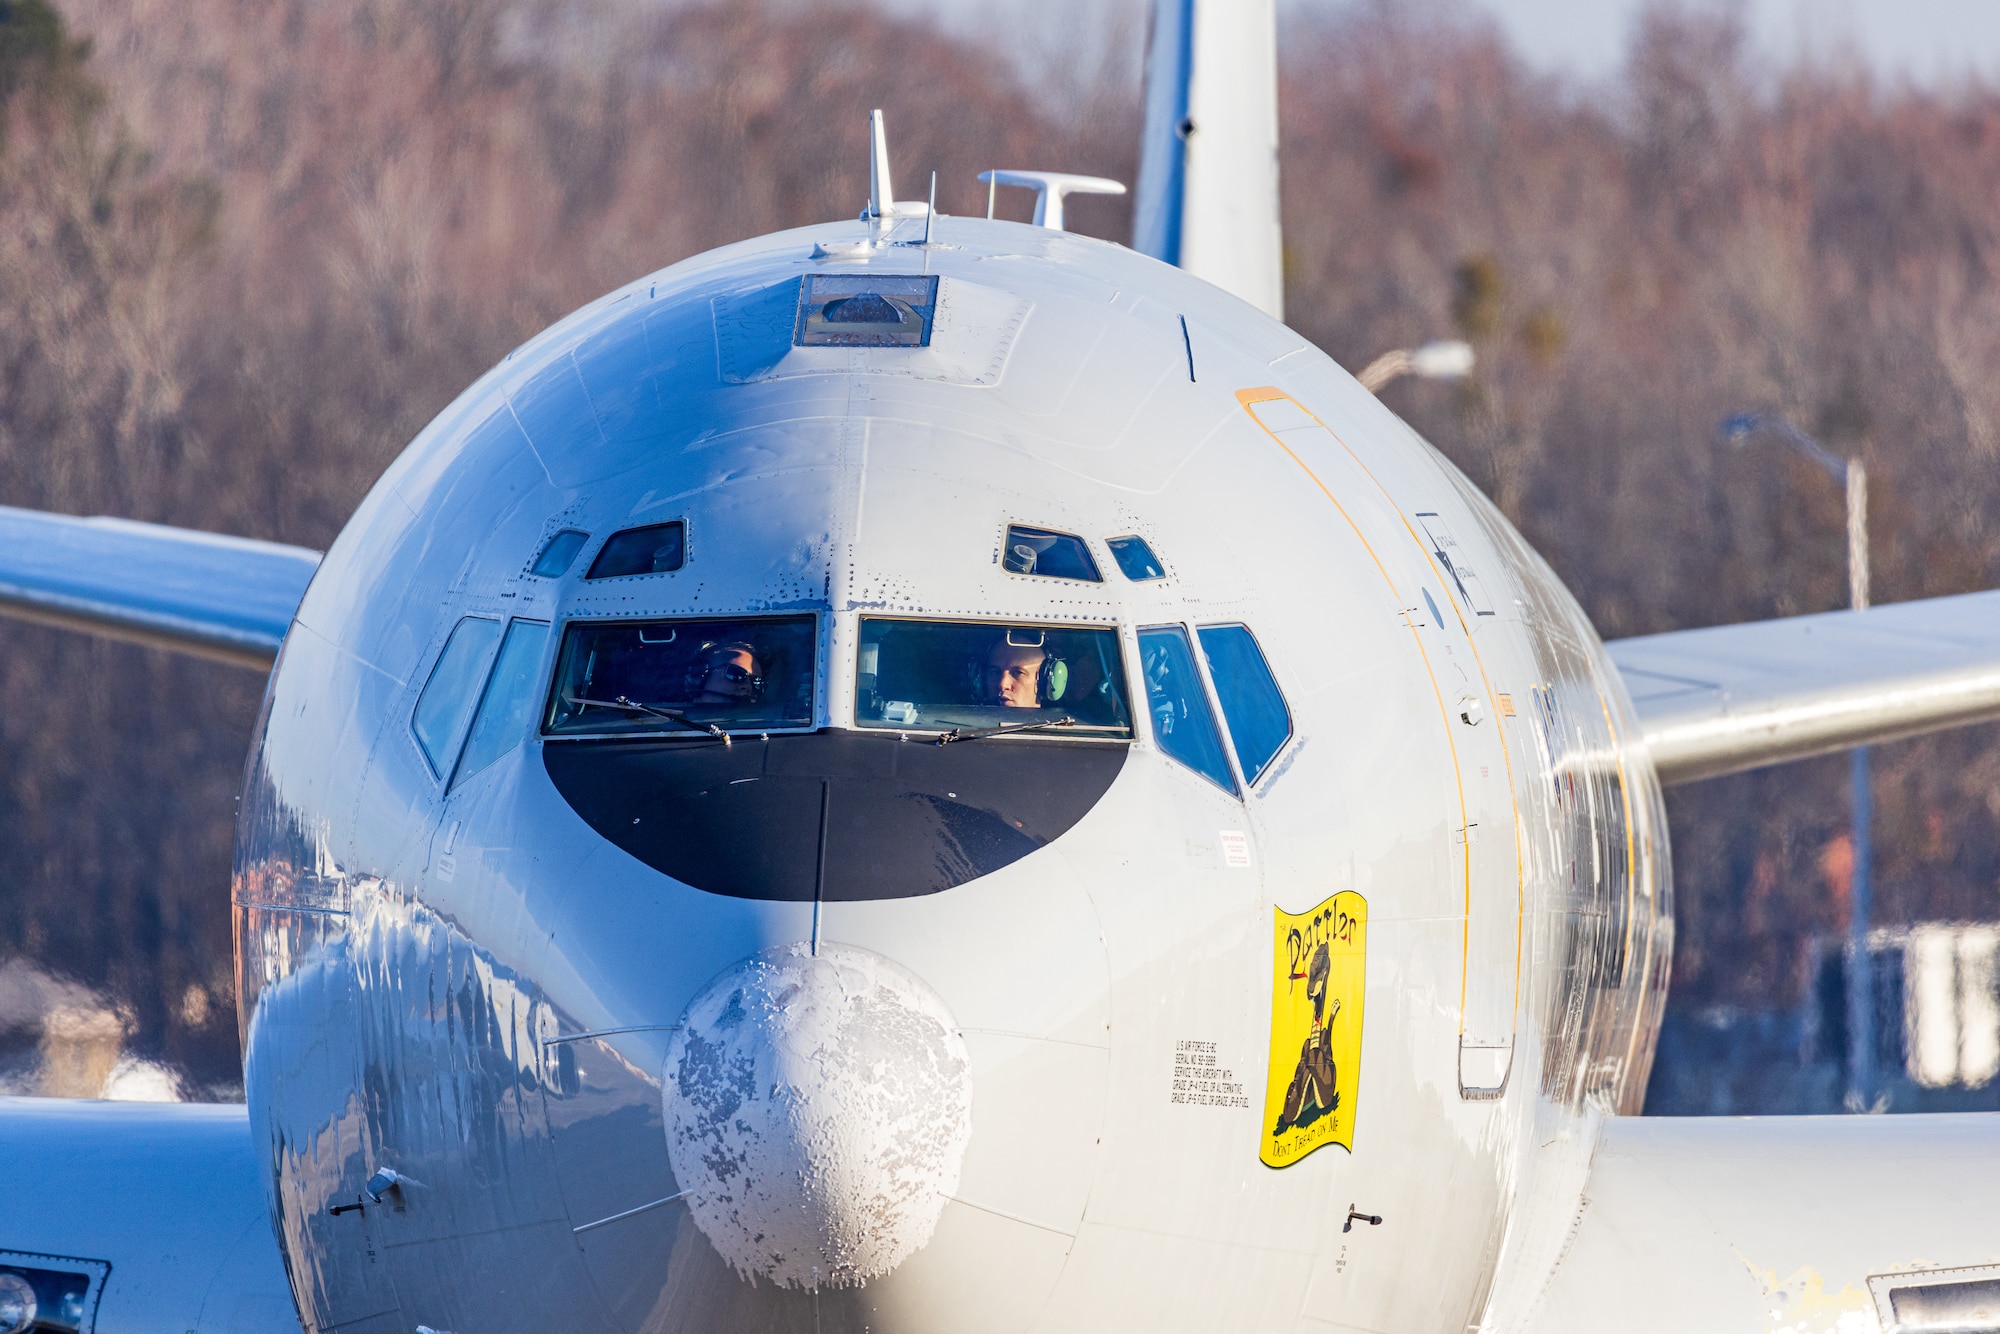 An E-8C Joint STARS aircraft taxis on the ramp prior to its final departure at Robins Air Force Base, Georgia, Feb. 11, 2022. The primary mission of Joint STARS is to provide theater ground and air commanders with ground surveillance to support attack operations and targeting that contributes to the delay, disruption and destruction of enemy forces. (U.S. Air National Guard photo by Tech. Sgt. Jeff Rice)